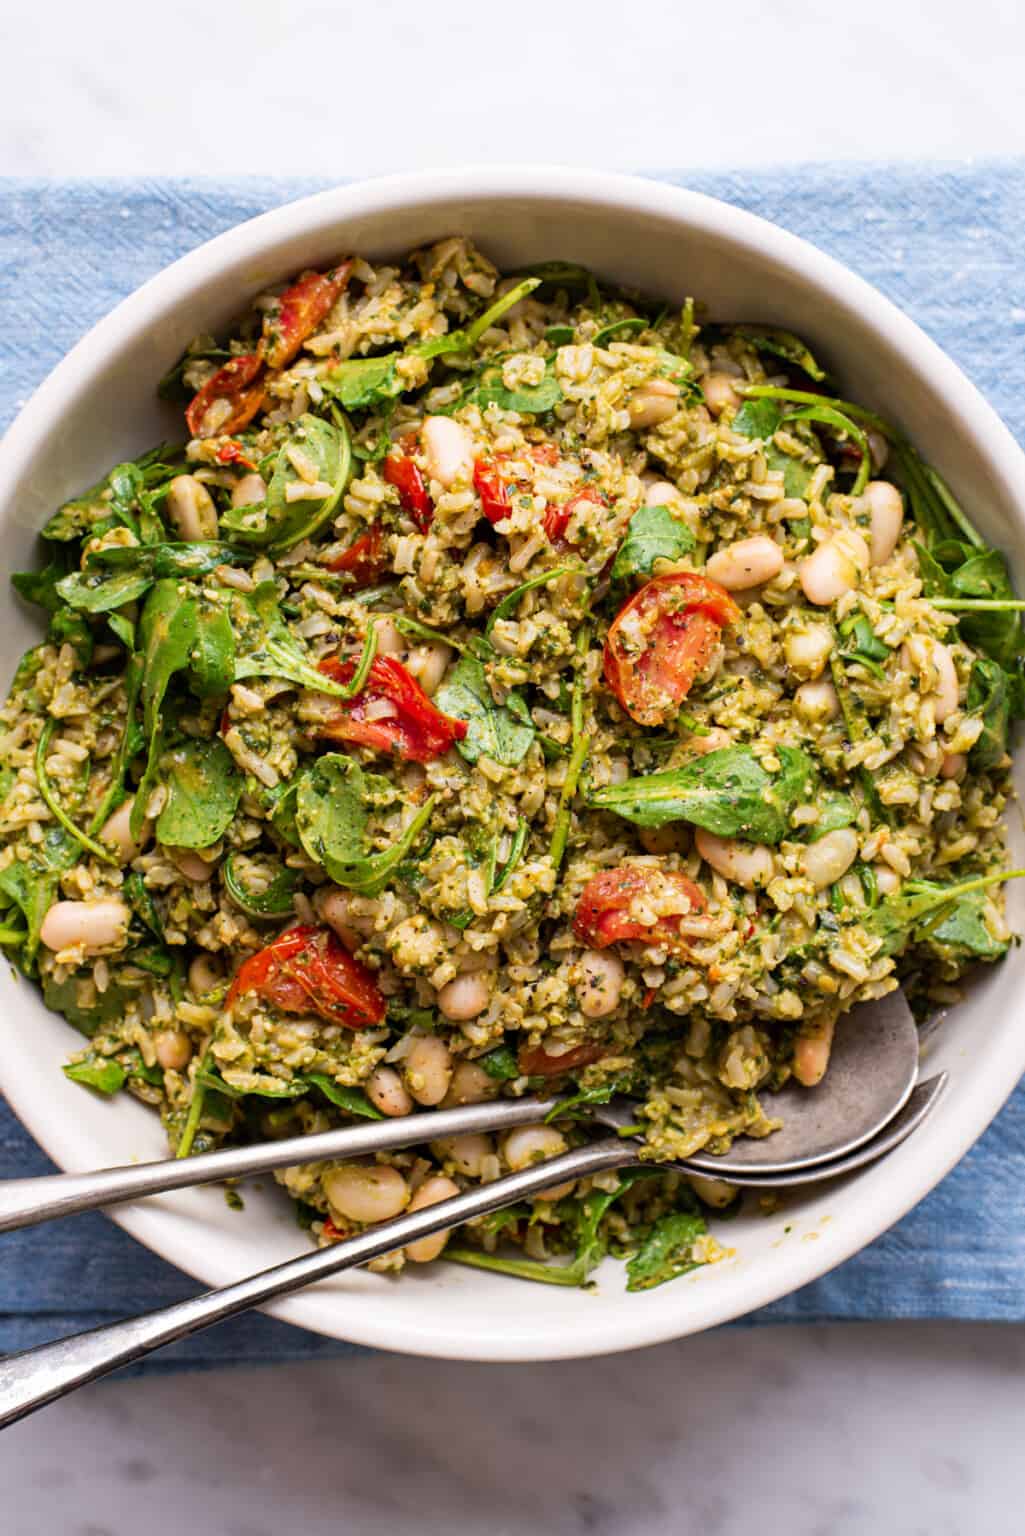 Summer Rice Salad with Pesto - The New Baguette